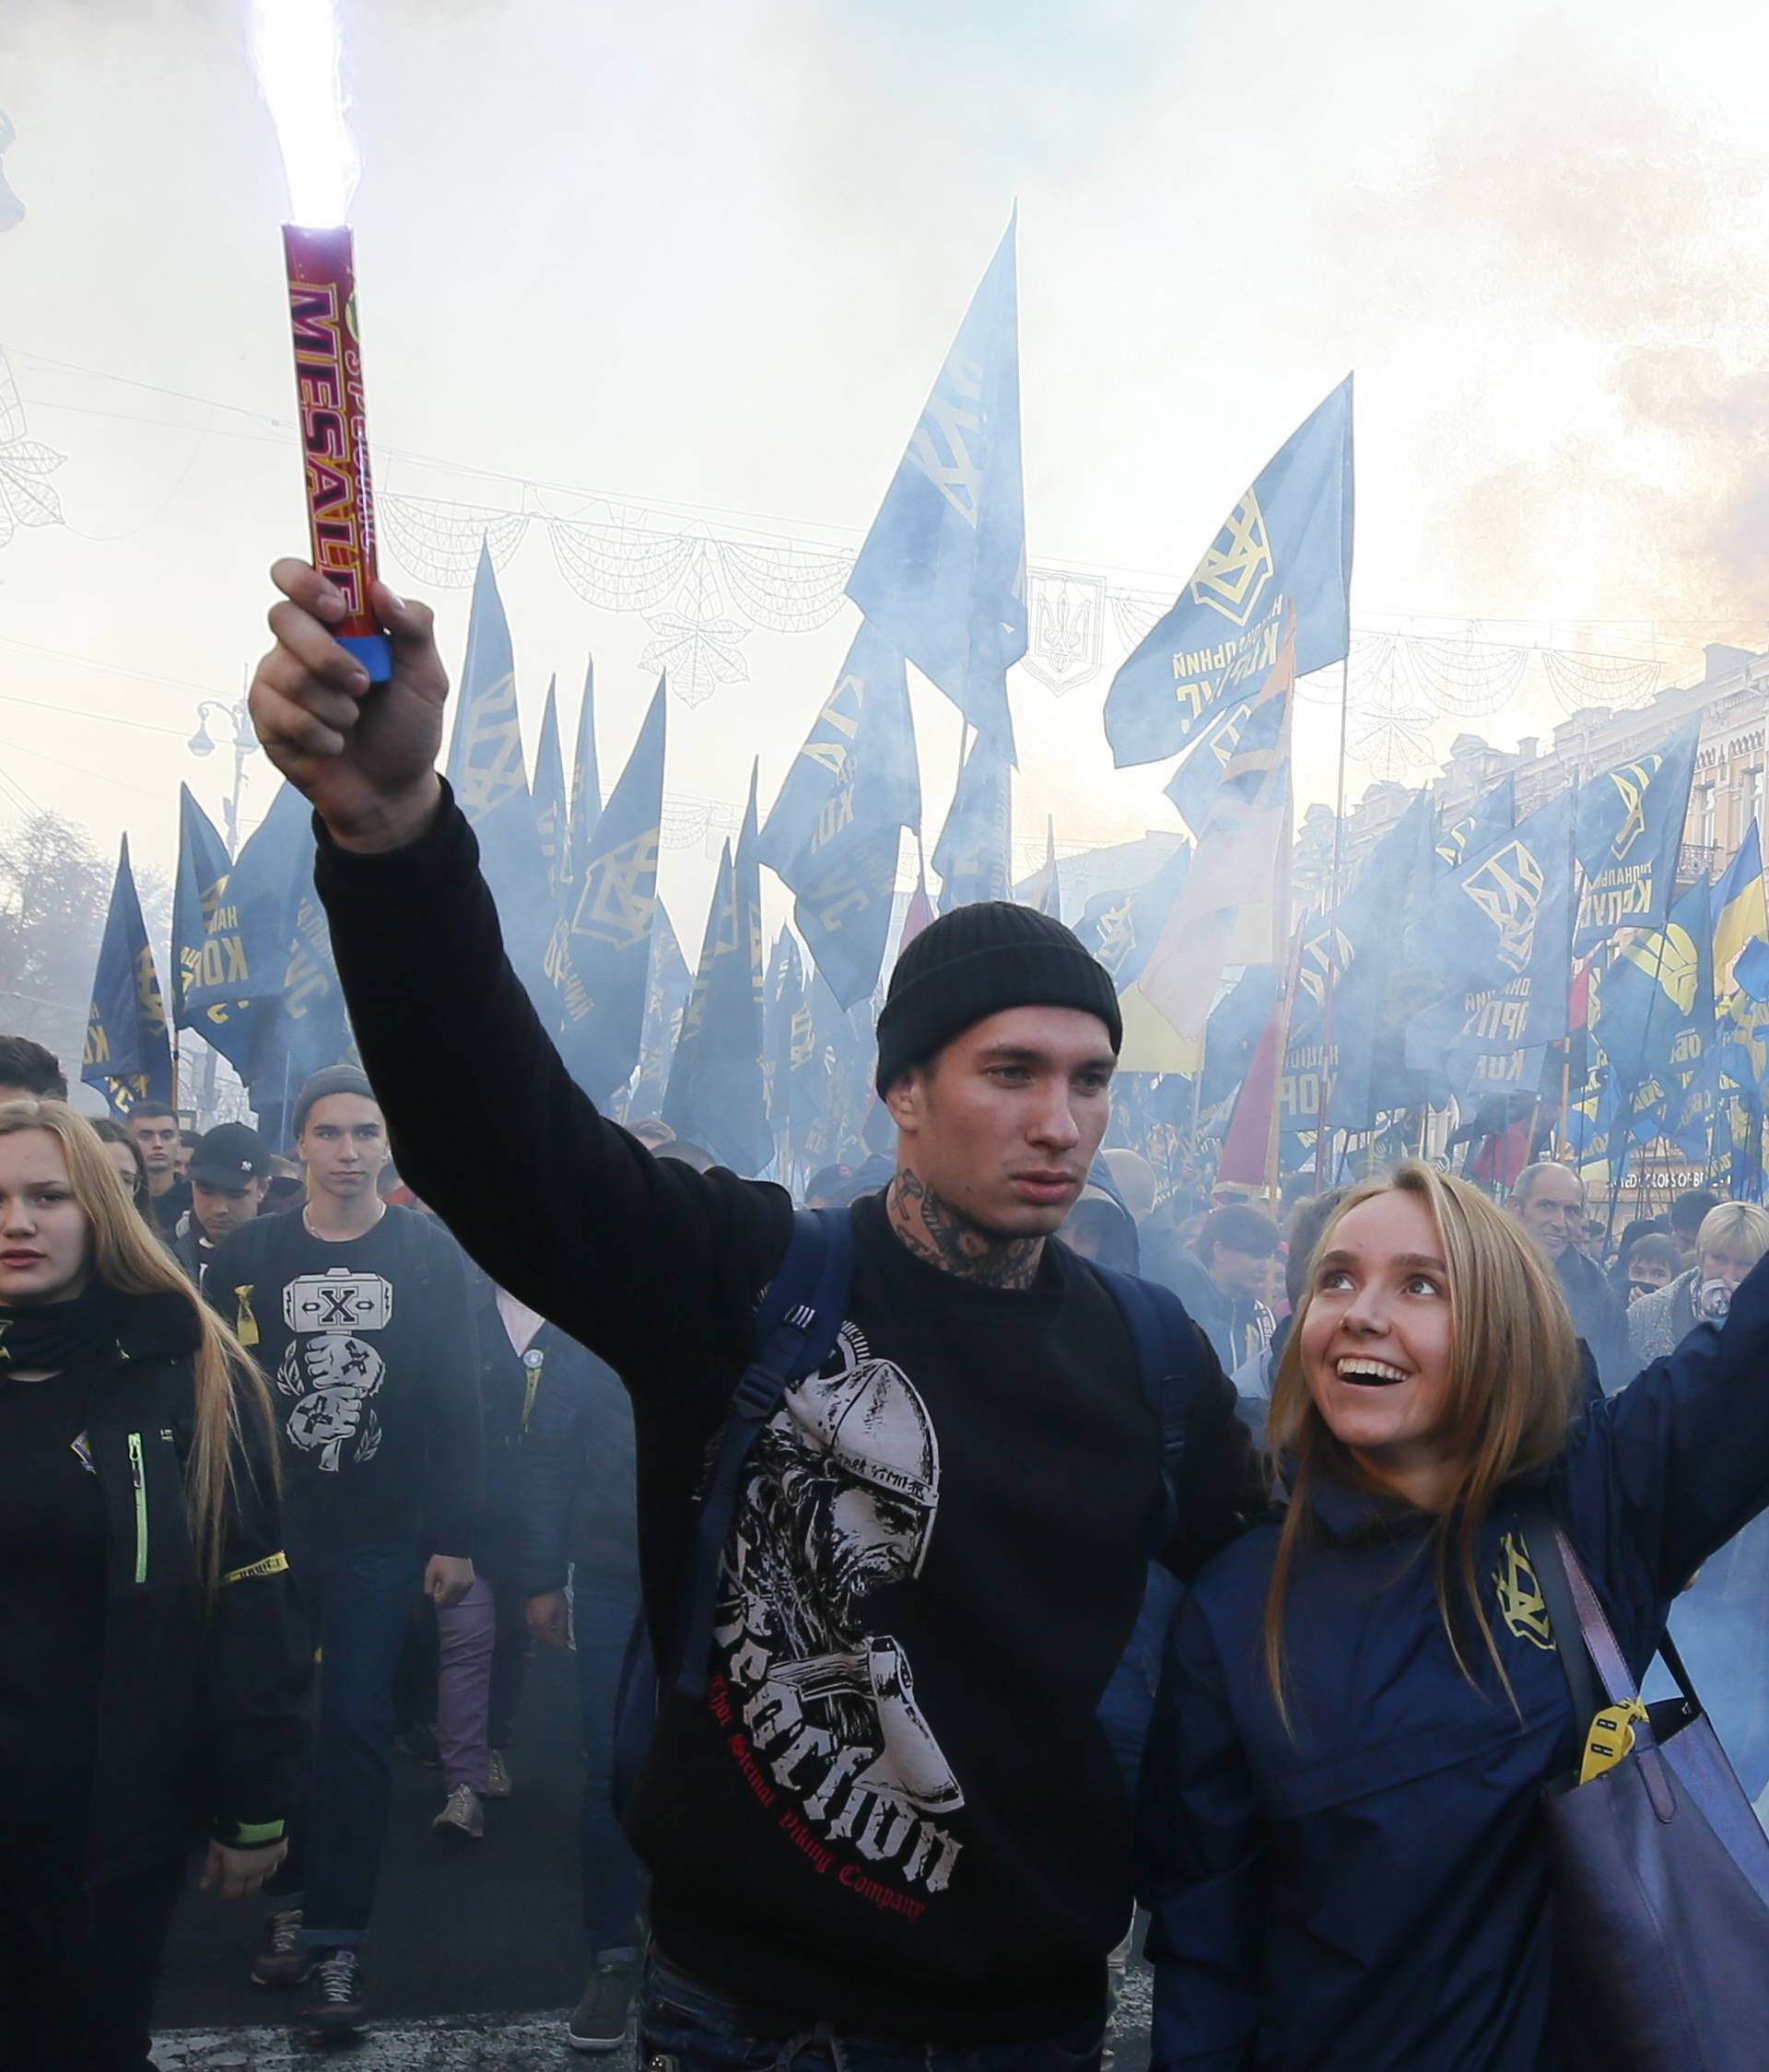 People take part in a procession to mark the Defender of Ukraine Day in Kiev